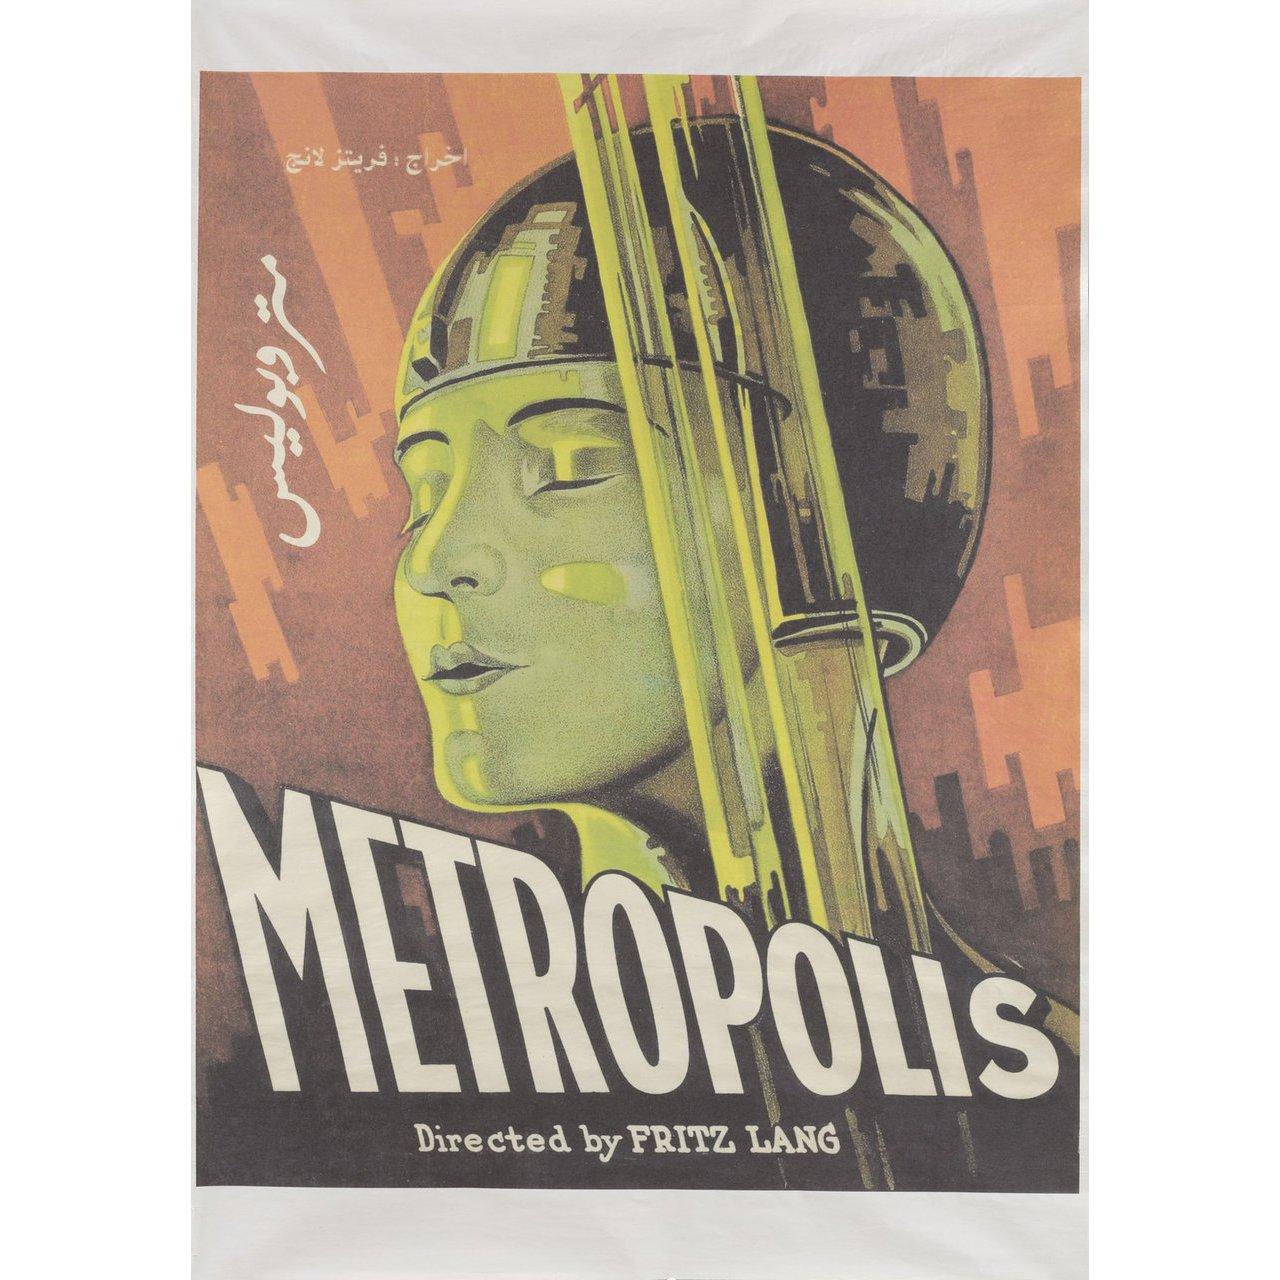 Original 2000s re-release Egyptian B1 poster for the 1927 film Metropolis directed by Fritz Lang with Alfred Abel / Gustav Frohlich / Rudolf Klein-Rogge / Fritz Rasp. Very Good-Fine condition, rolled. Please note: the size is stated in inches and